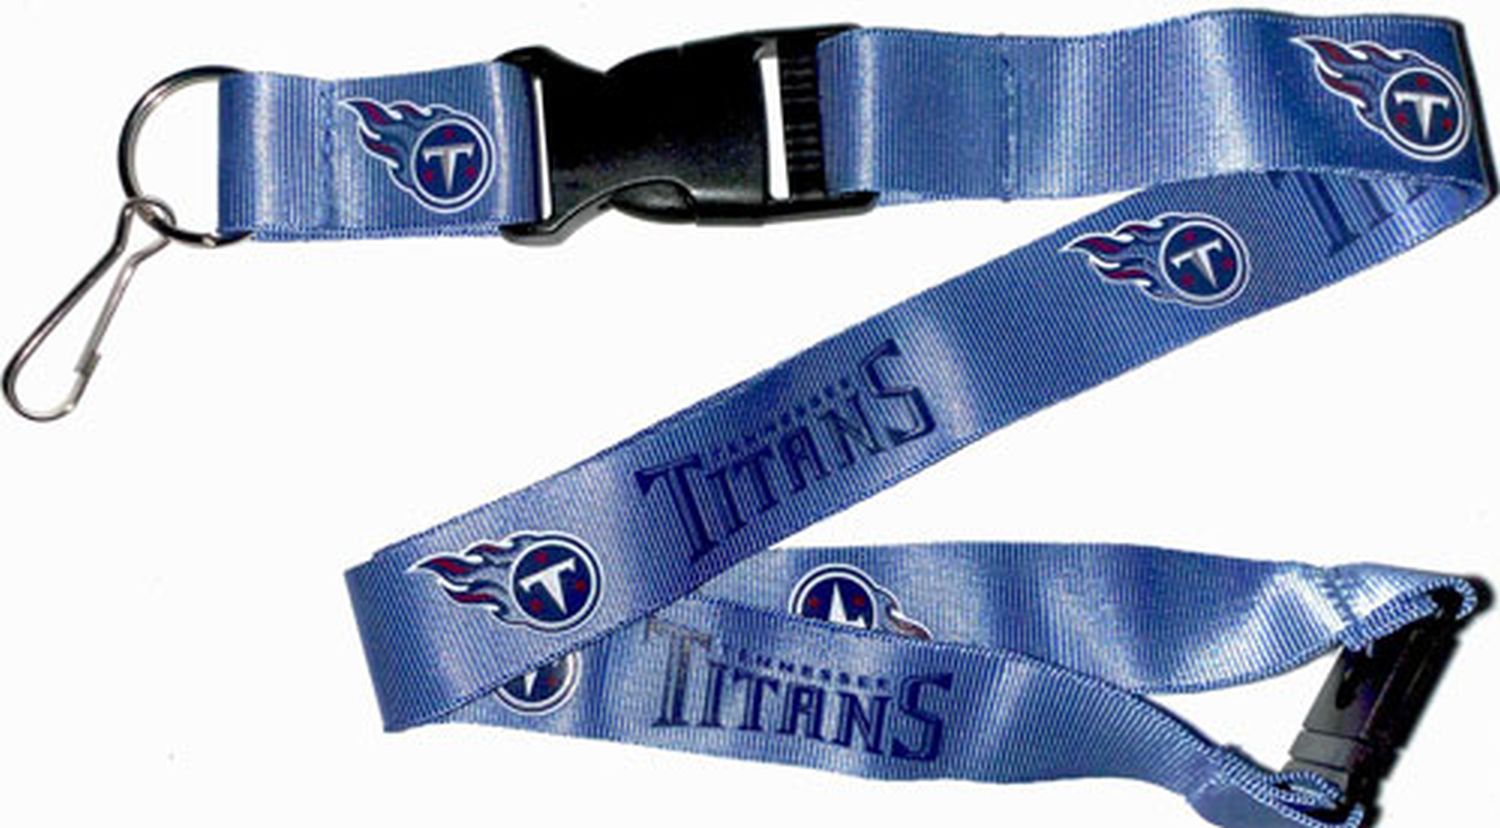 NFL Tennessee Titans Lanyard - Blue